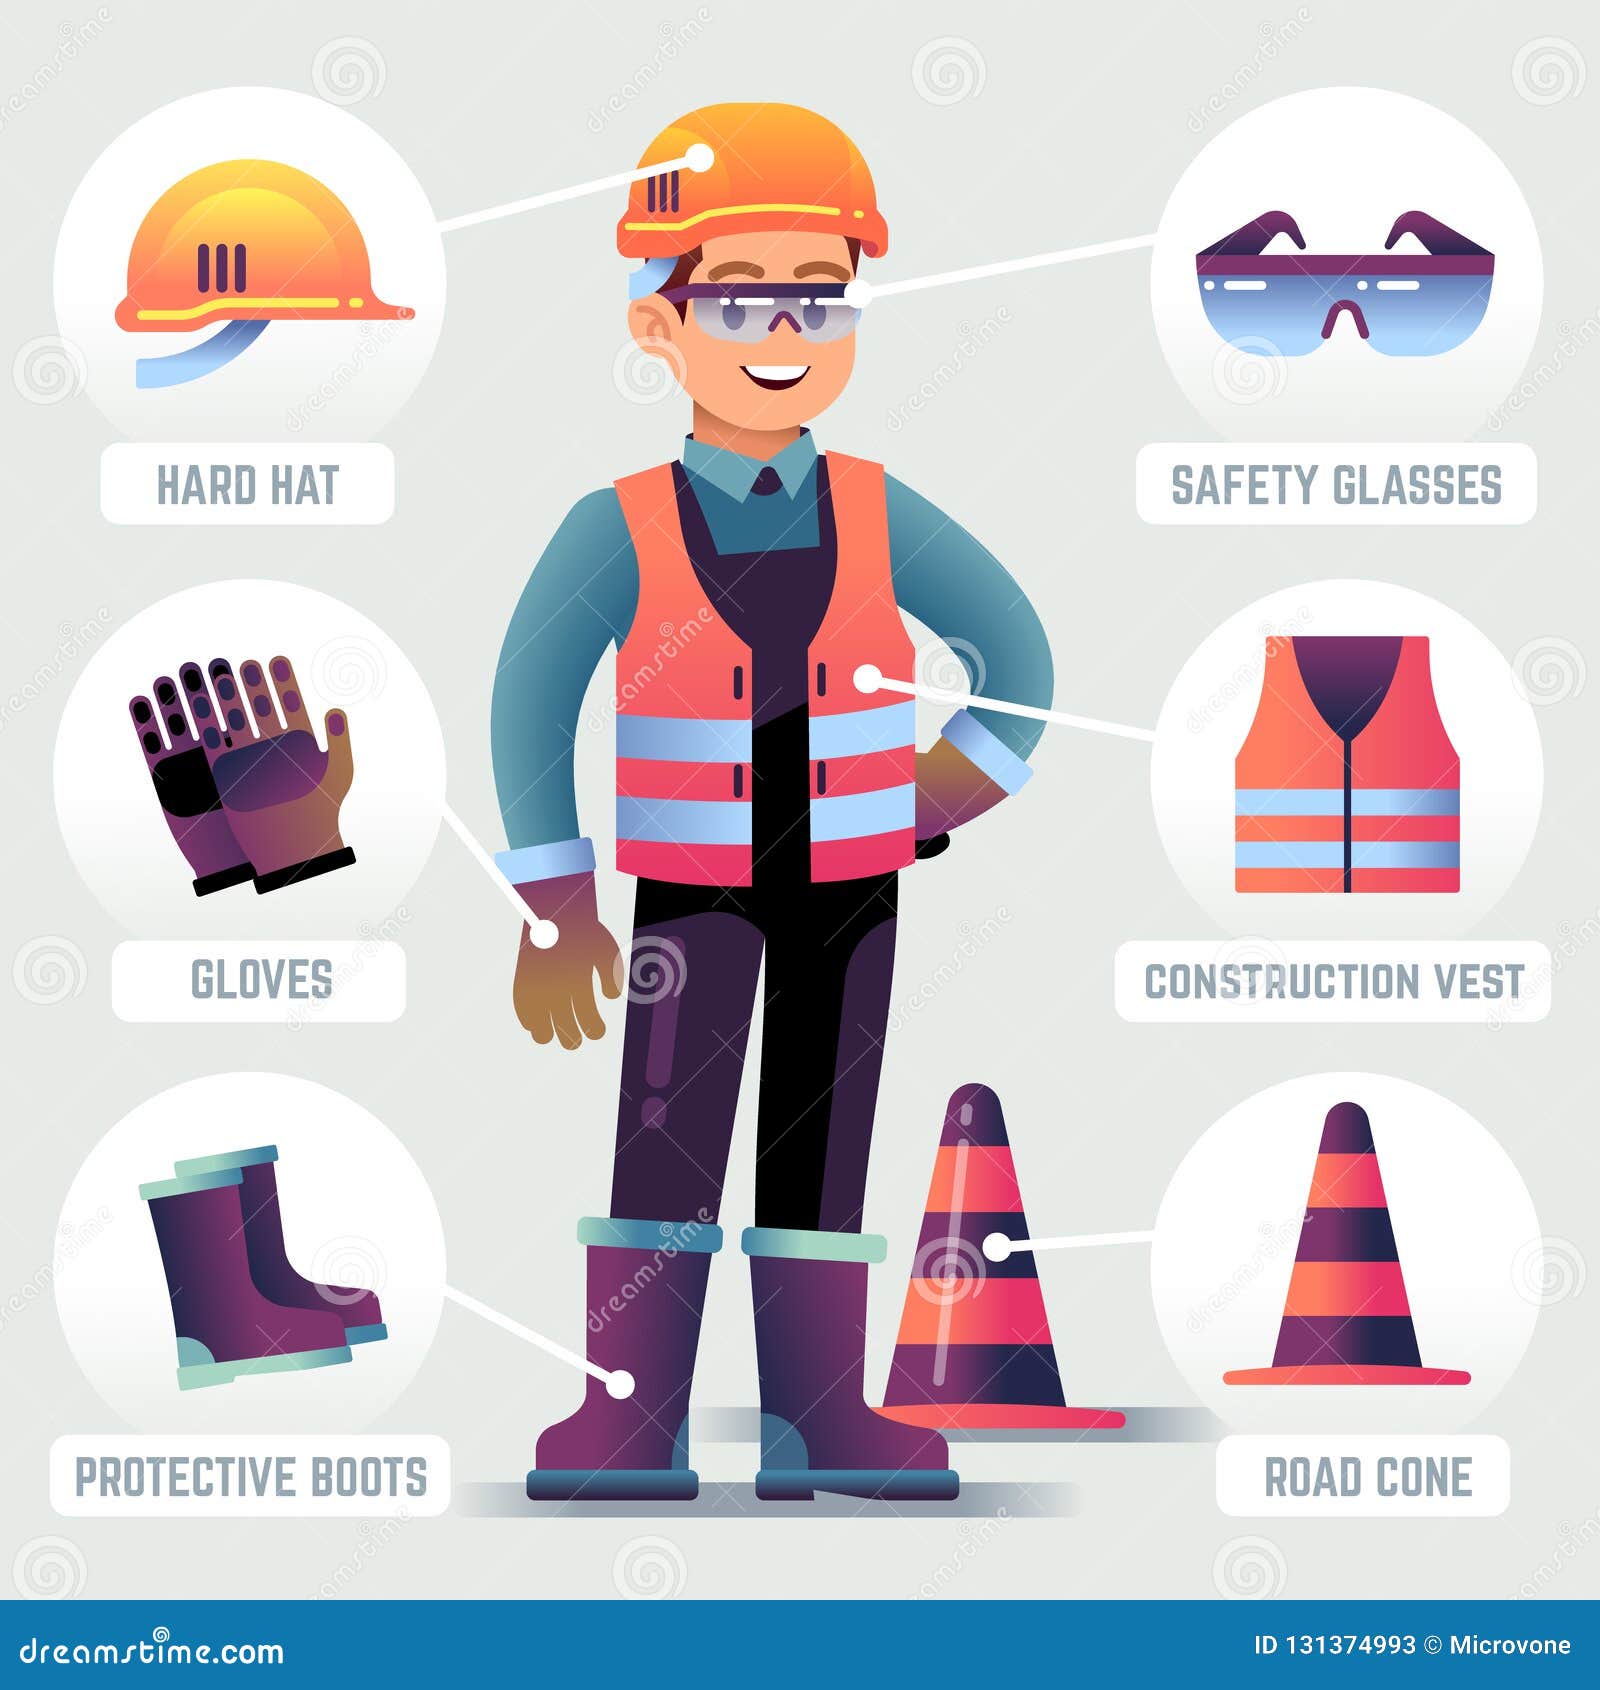 Protective Road Clothing Stock Illustrations – 1,118 Protective